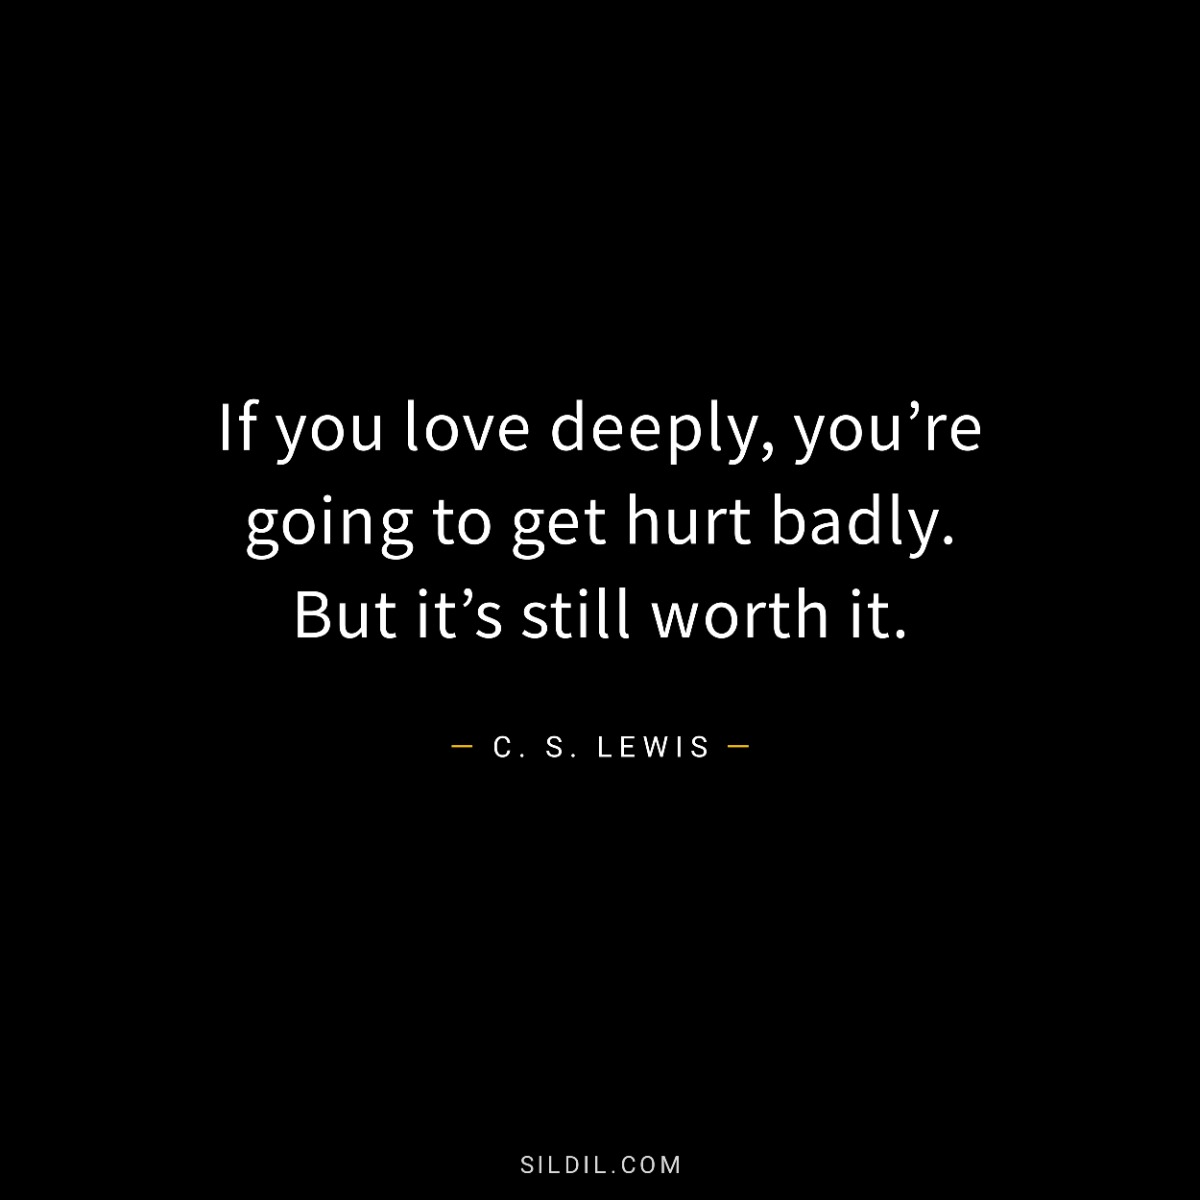 If you love deeply, you’re going to get hurt badly. But it’s still worth it.